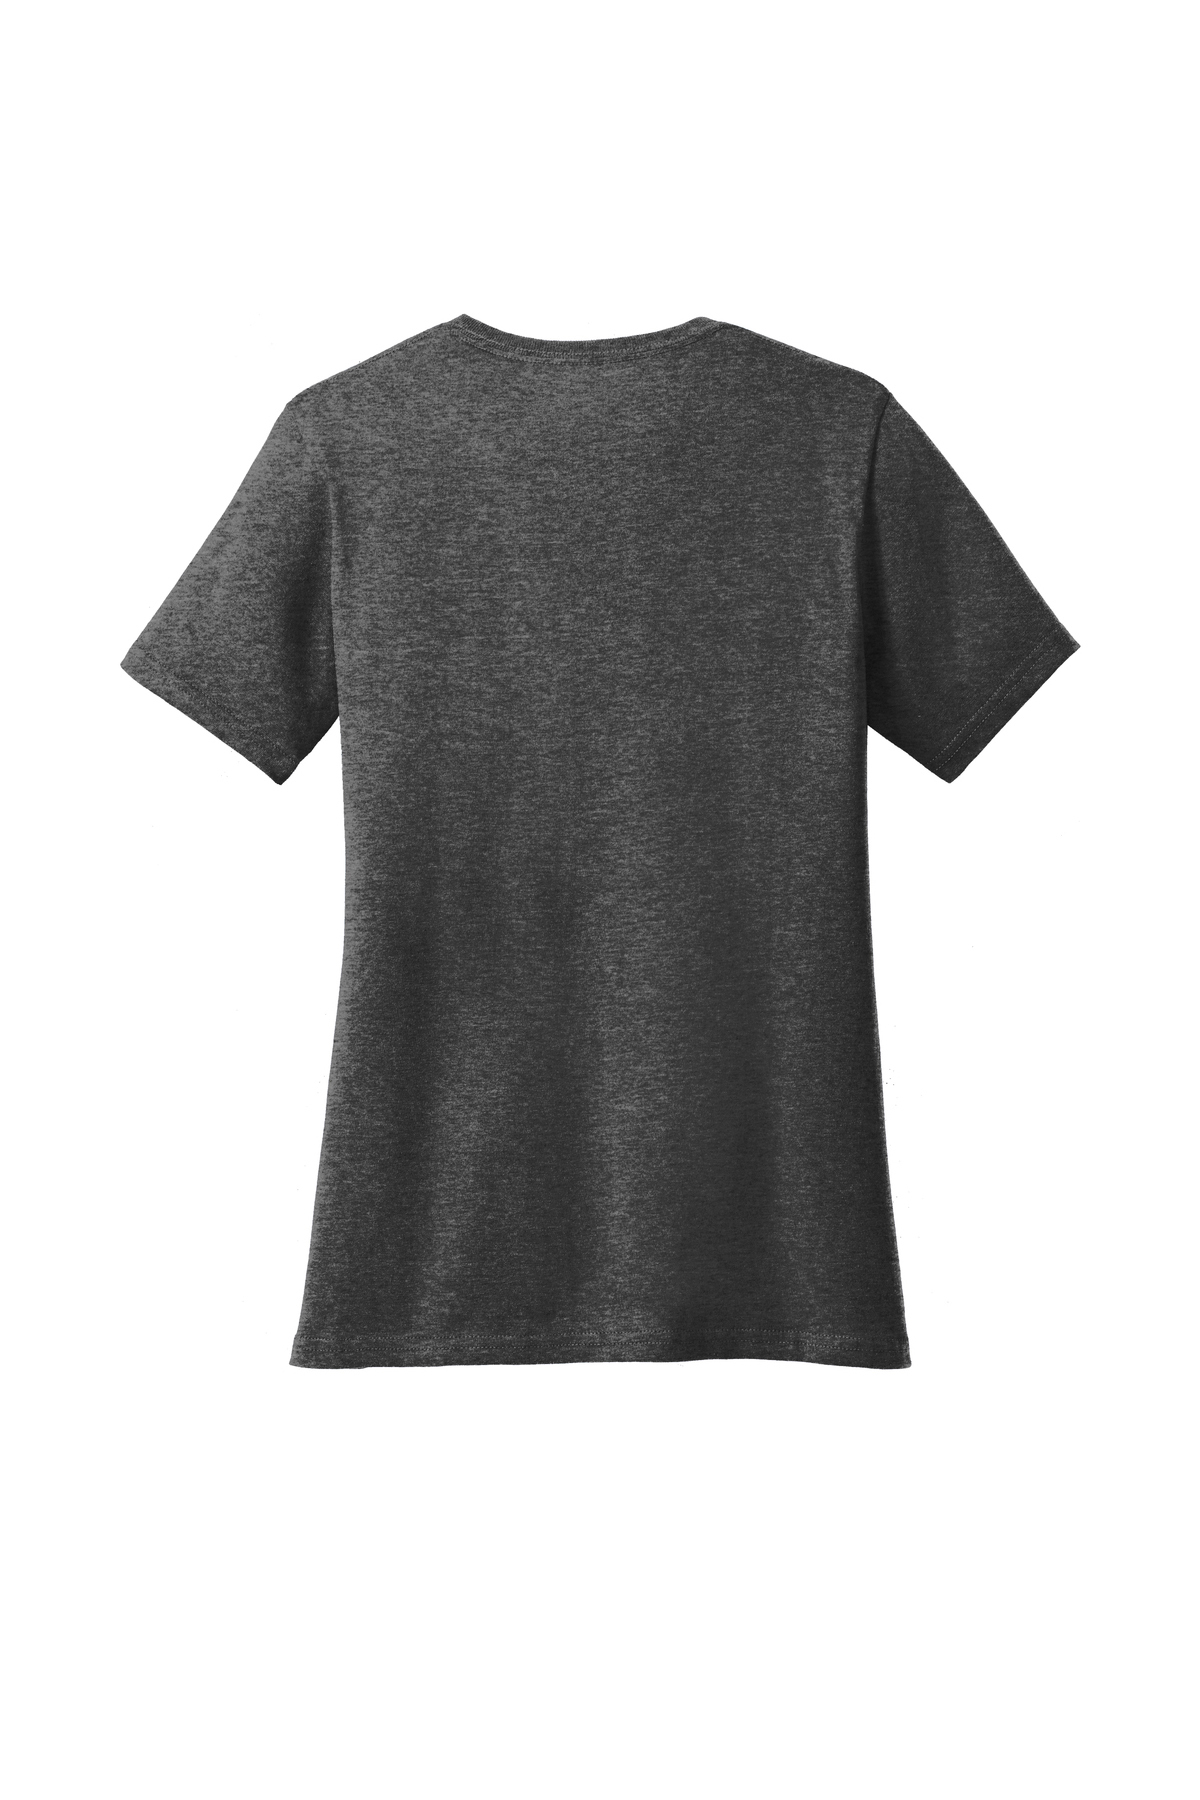 Port & Company Ladies Core Cotton Tee | Product | Company Casuals